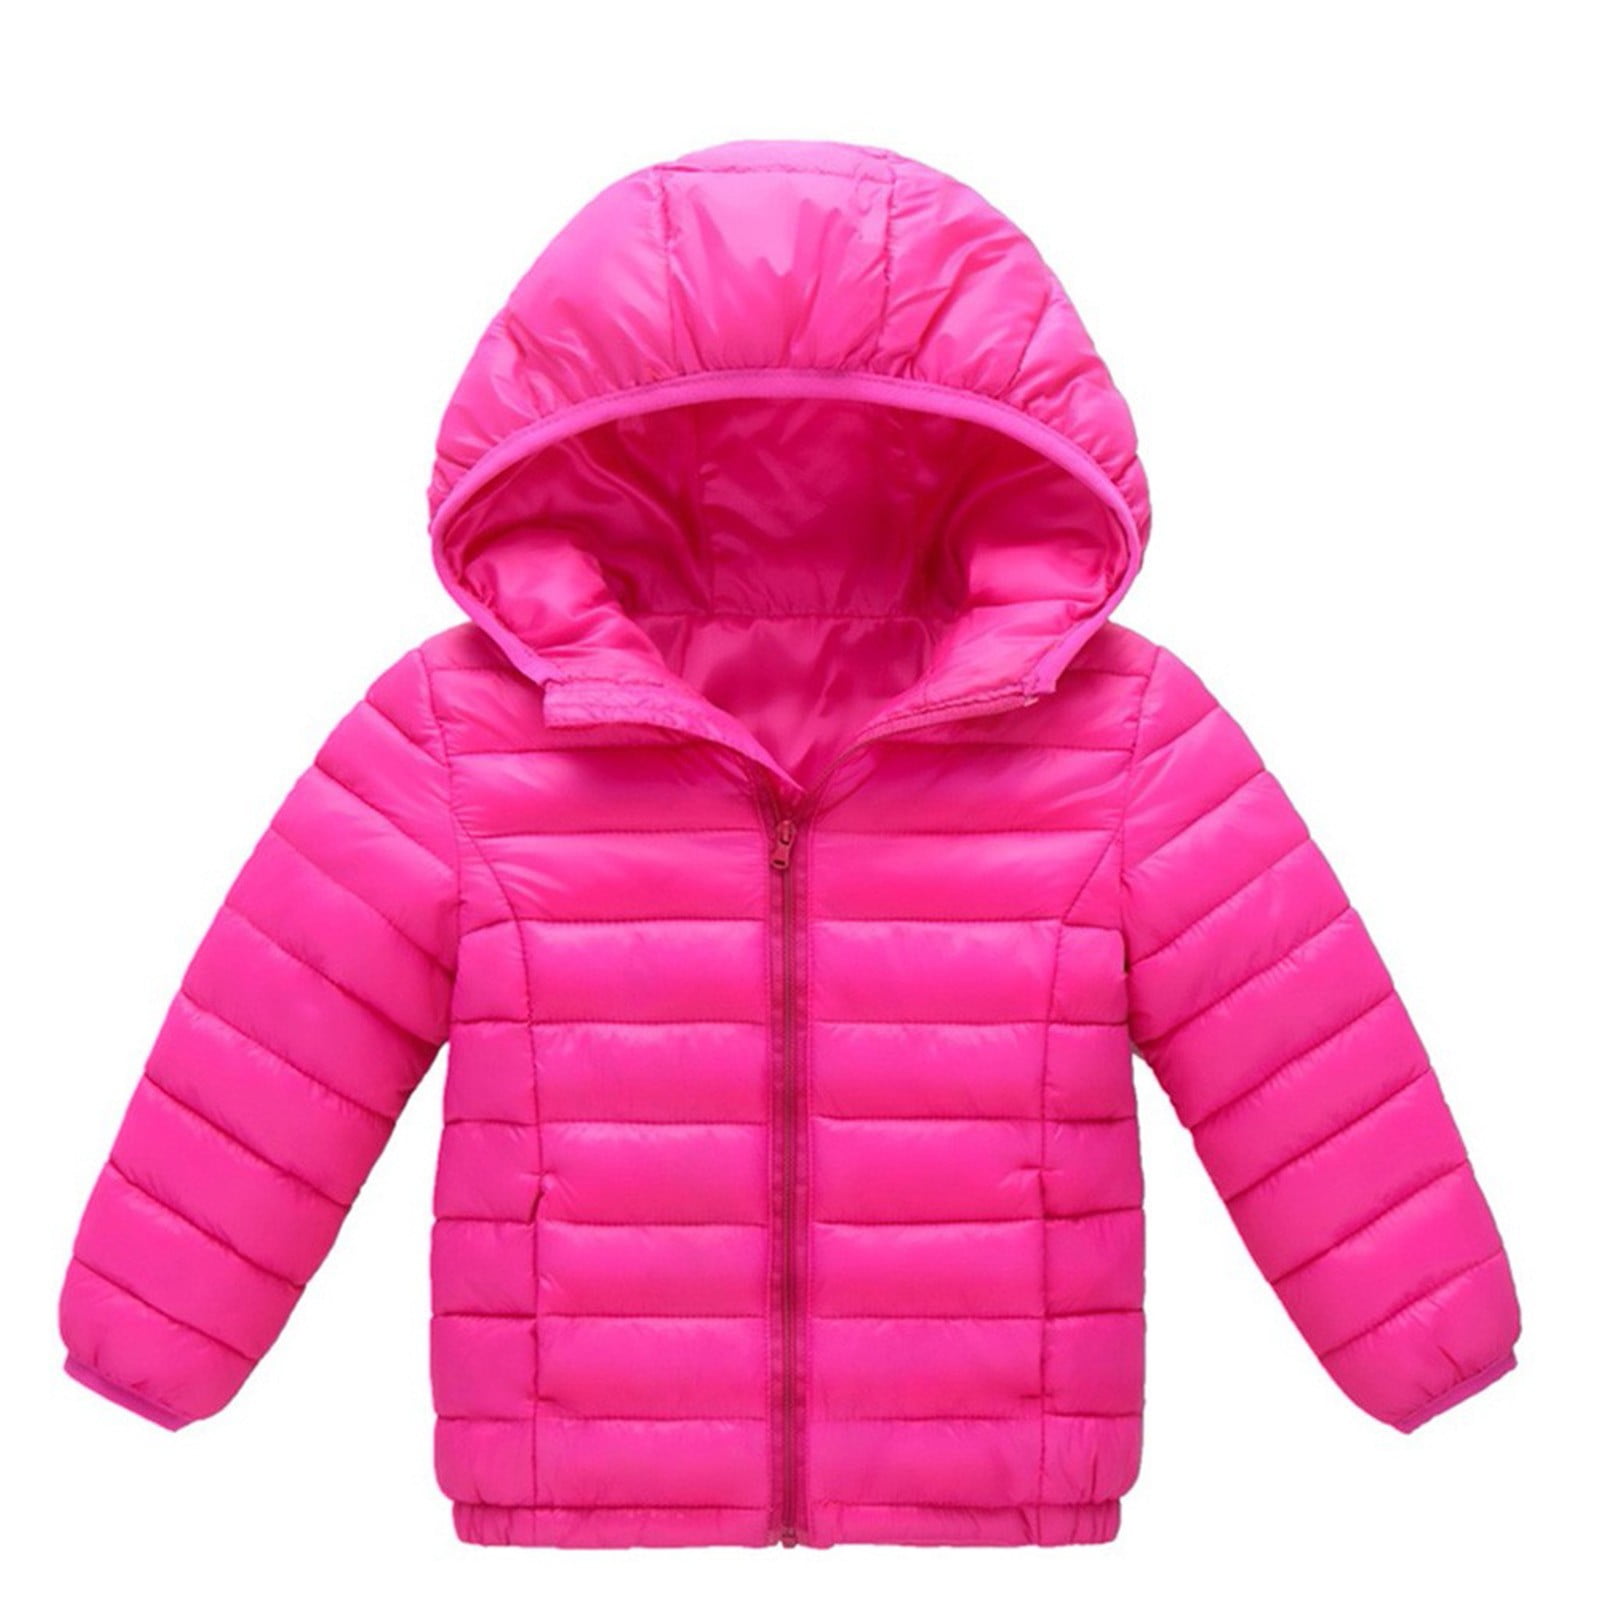 TAIAOJING Kids Toddler Jacket Winter Children Long Sleeve Solid Color ...